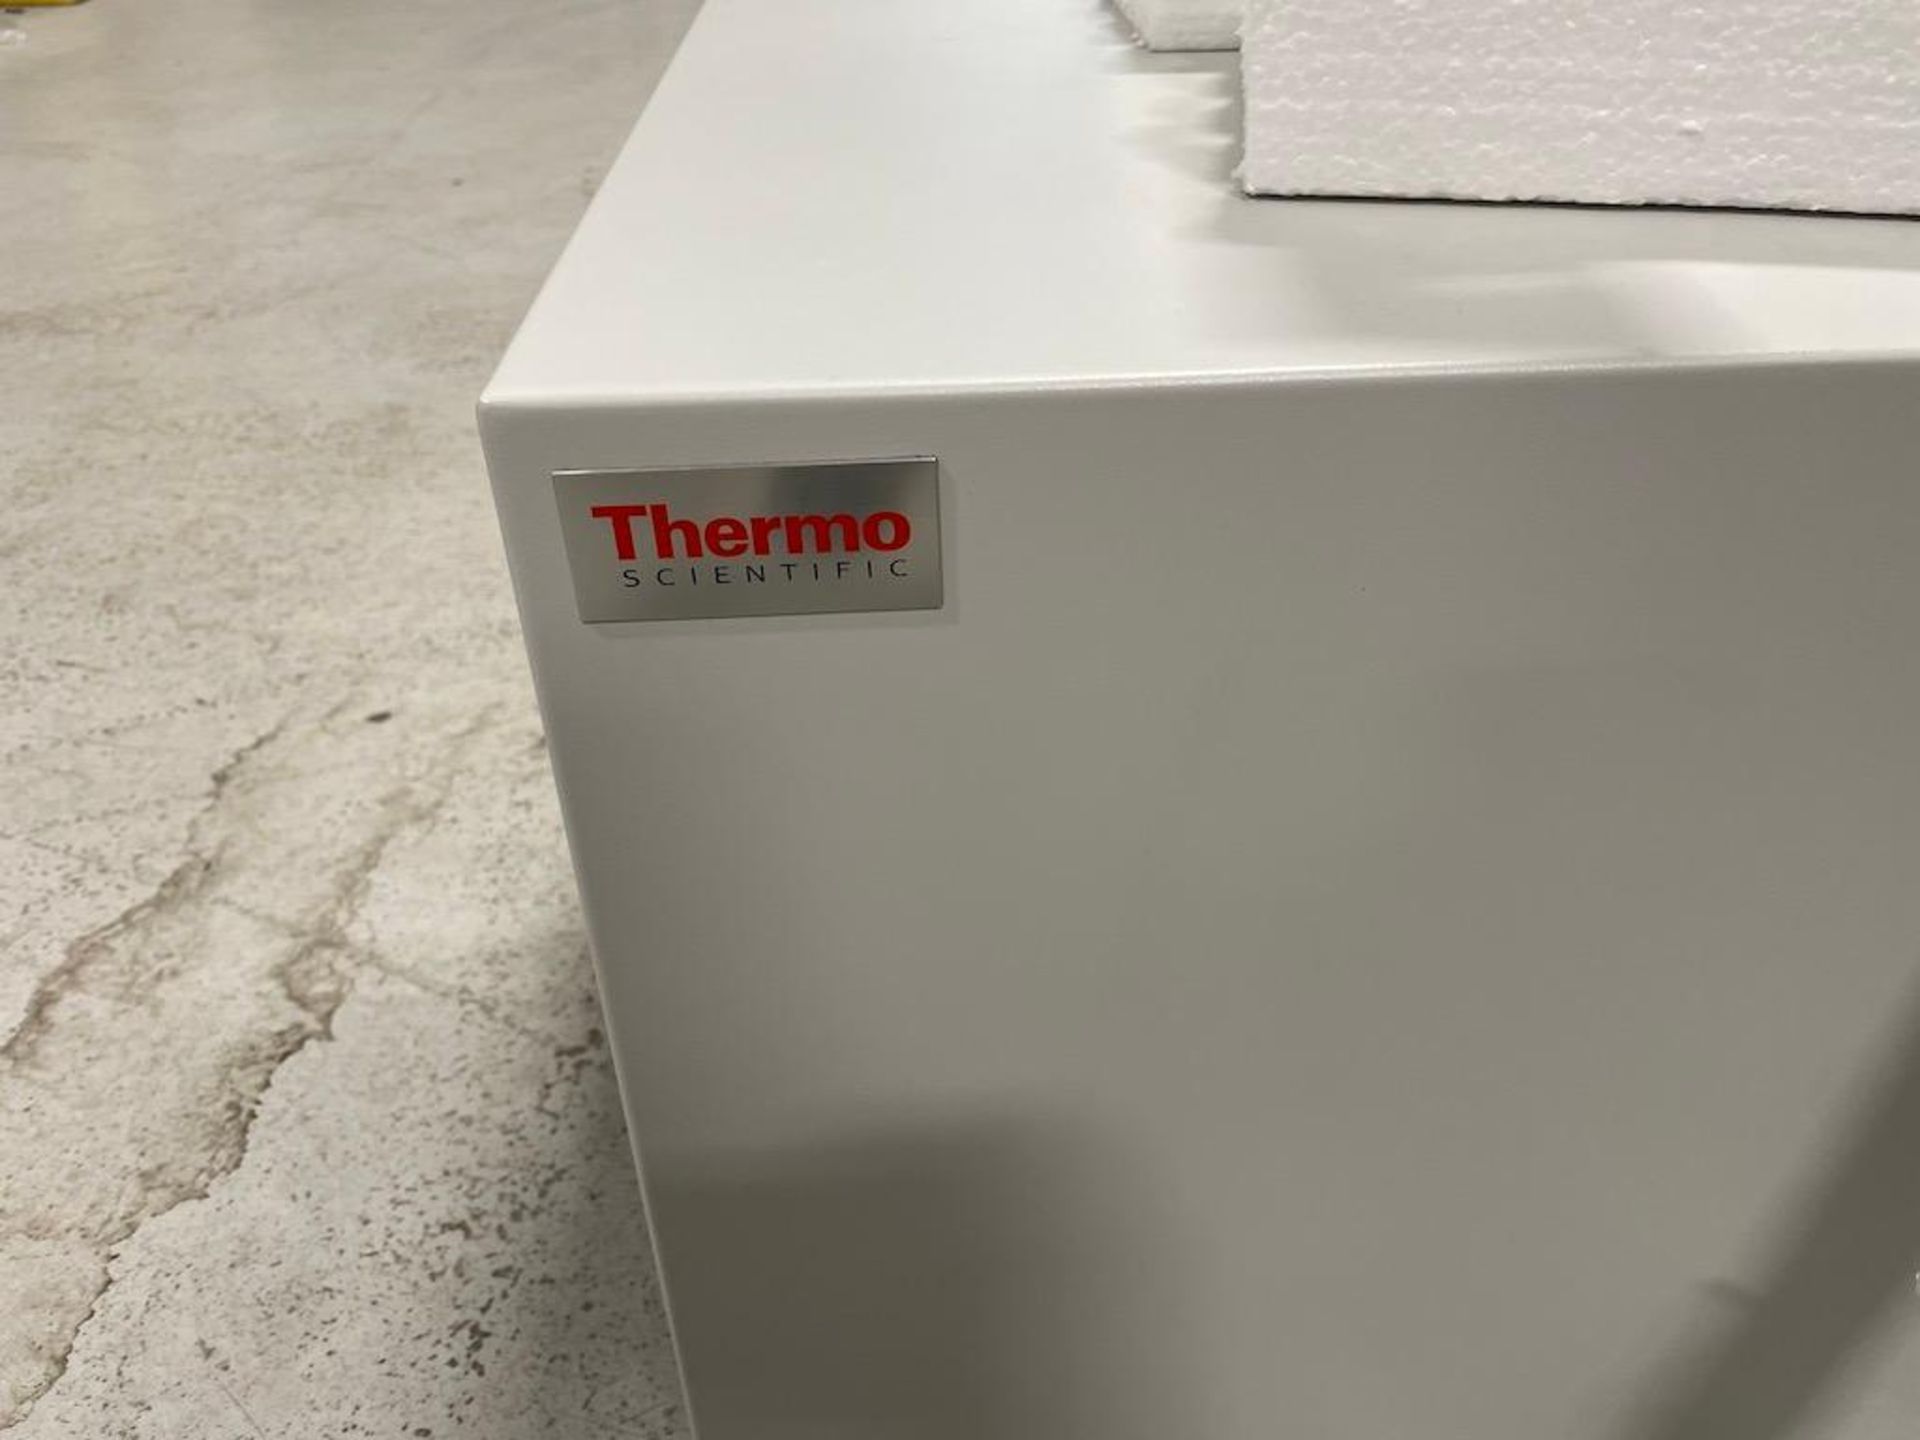 2017 THERMO SCIENTIFIC EXACTIVE SERIES MASS SPECTROMETER, MODEL Q EXACTIVE PLUS, SN 07354L, INCLUDES - Image 14 of 82